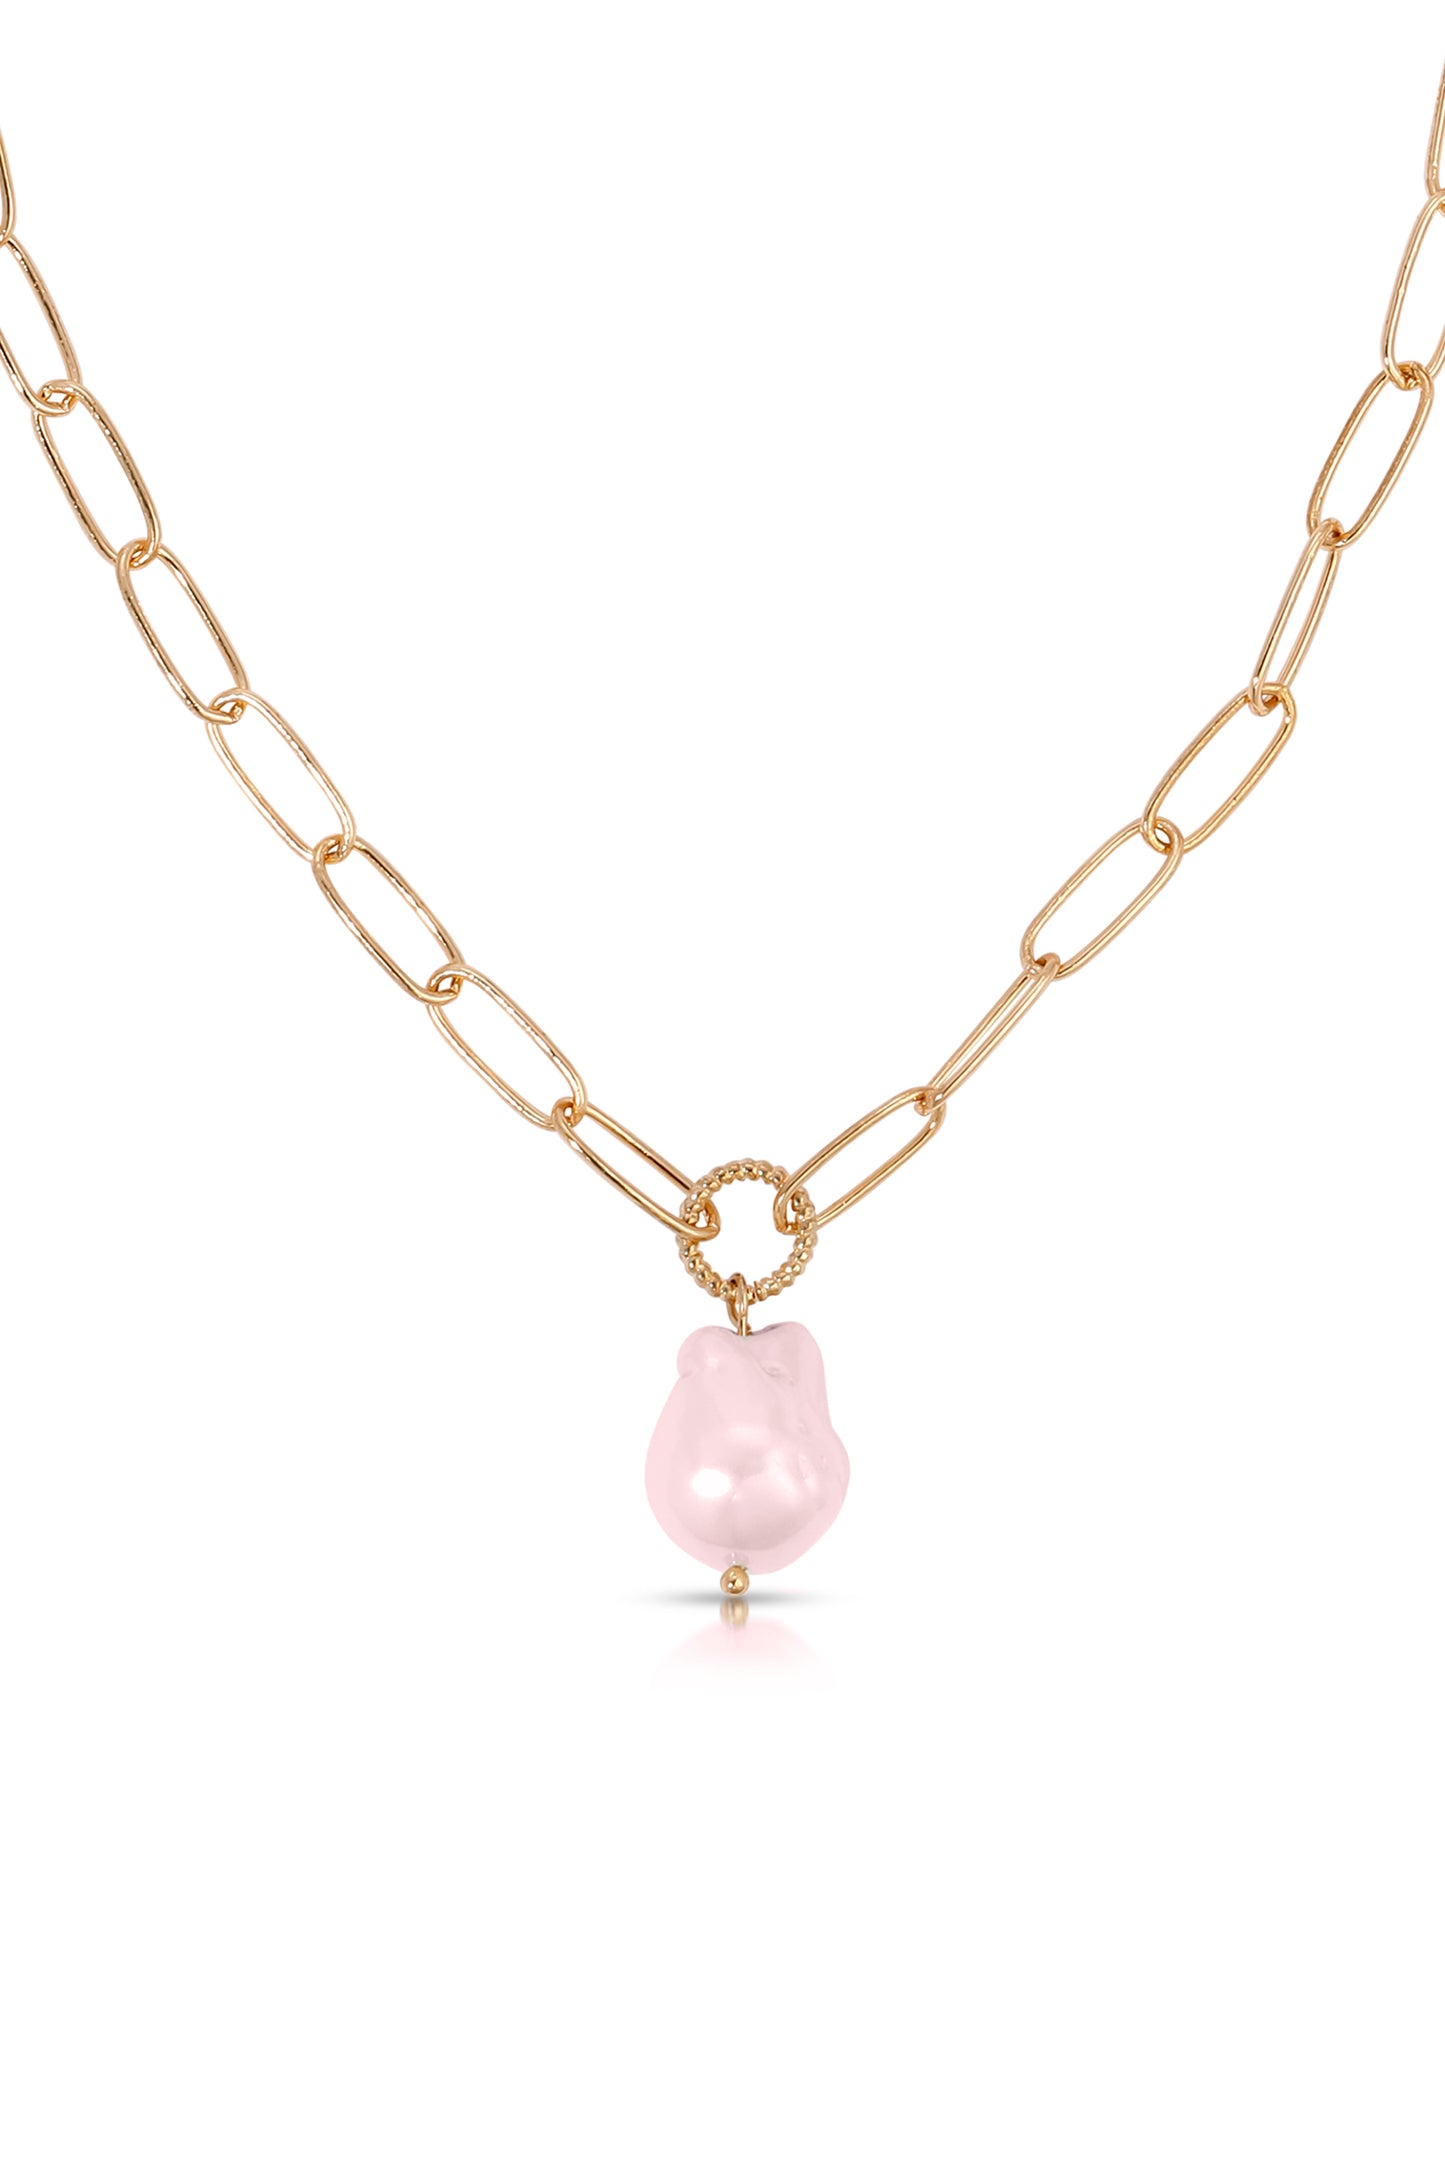 Single Pearl Open Links Chain Necklace in pink pearl close up